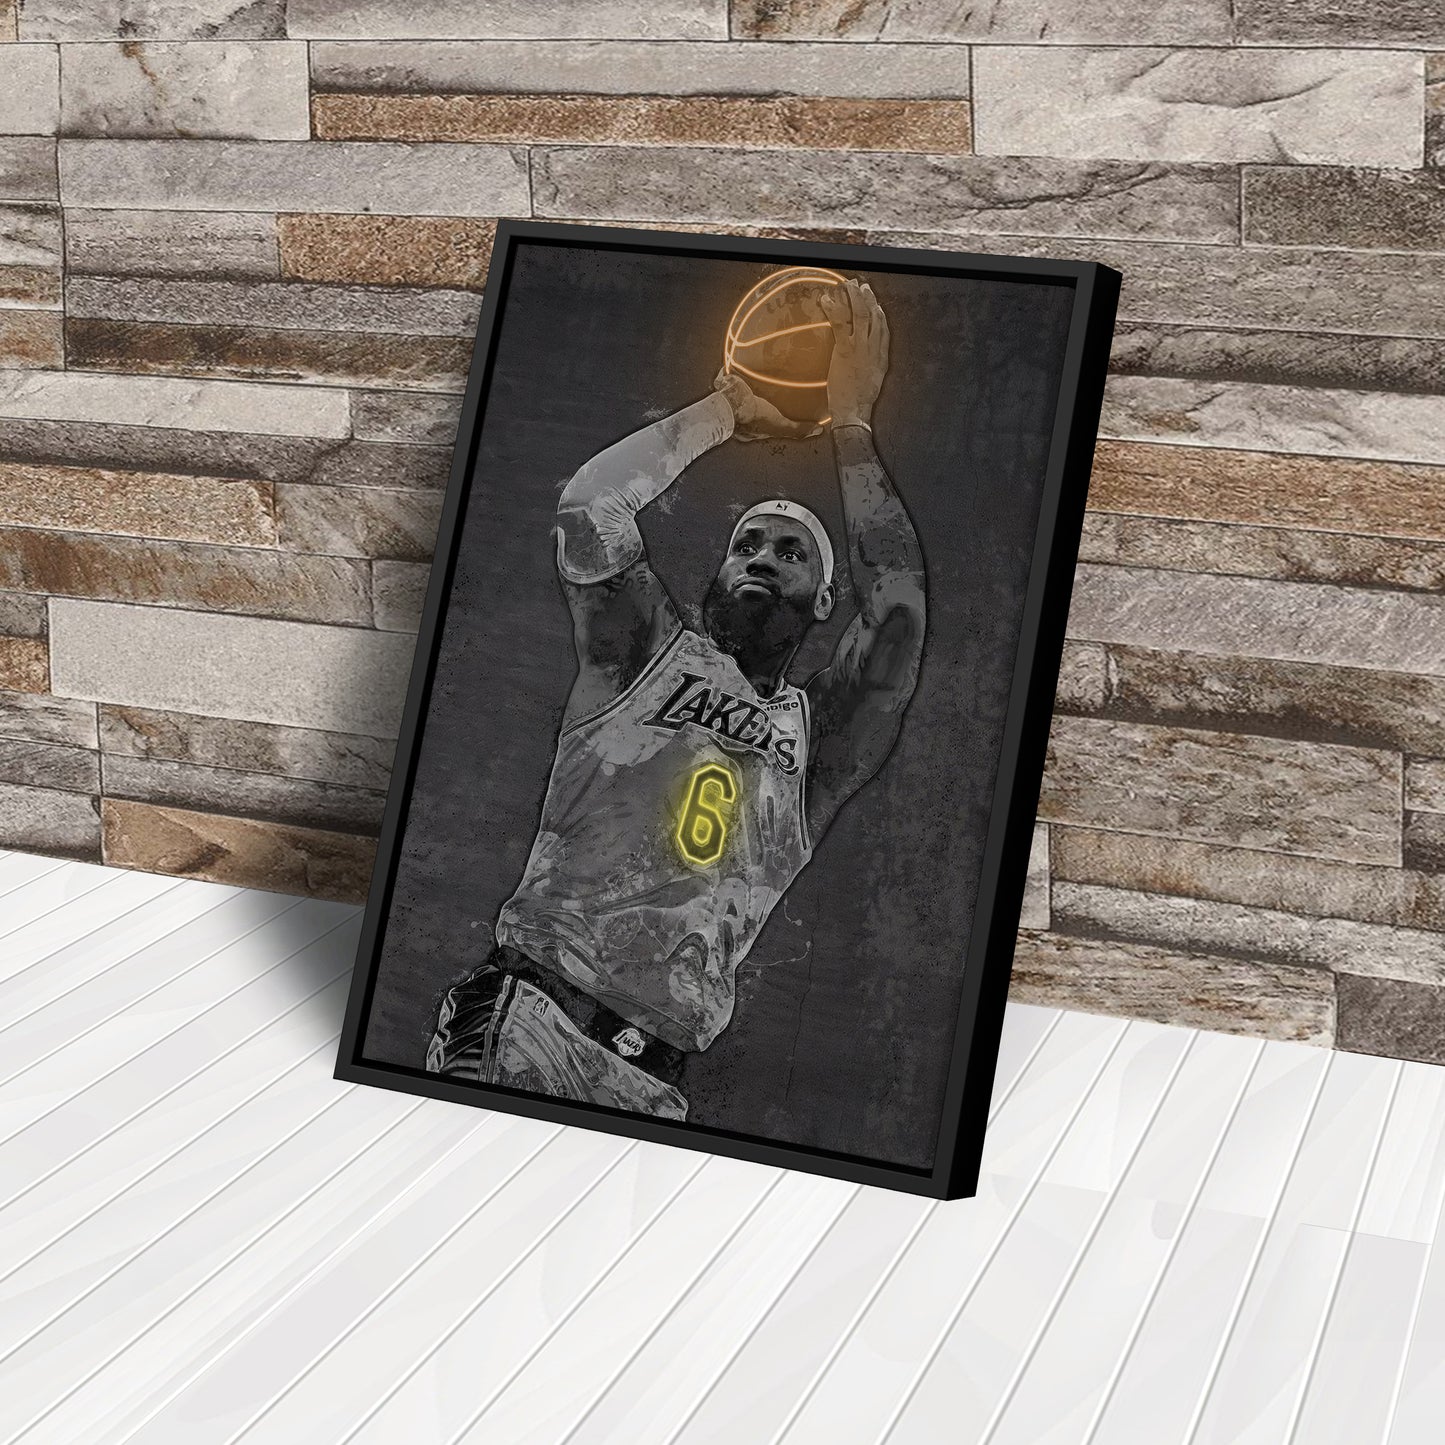 Lebron James Poster Graffiti Neon Los Angeles Lakers Basketball Hand Made Poster Canvas Framed Print Wall Kids Art Man Cave Gift Home Decor